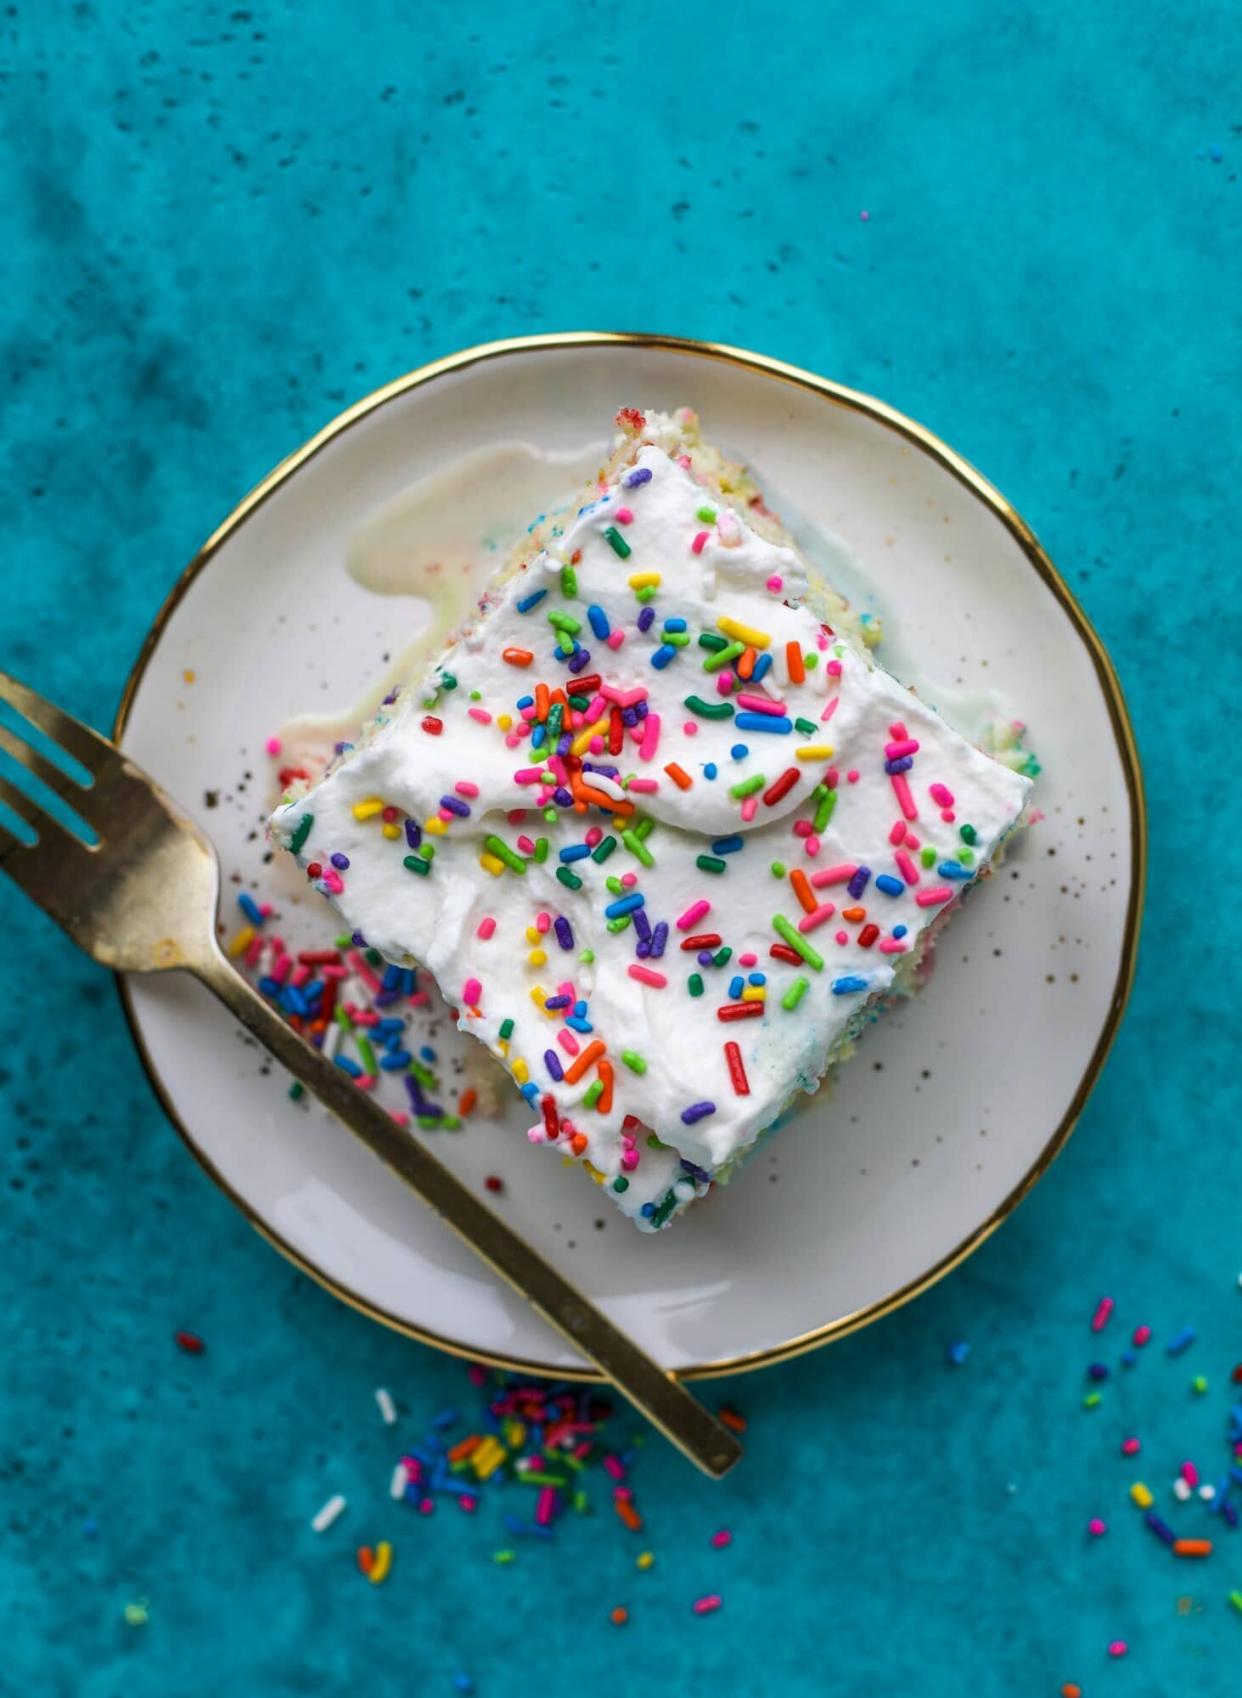 <strong><a href="https://www.howsweeteats.com/2019/05/tres-leches-confetti-cake/" target="_blank" rel="noopener noreferrer">Get the Tres Leches Confetti Cake recipe from How Sweet Eats</a>  </strong>